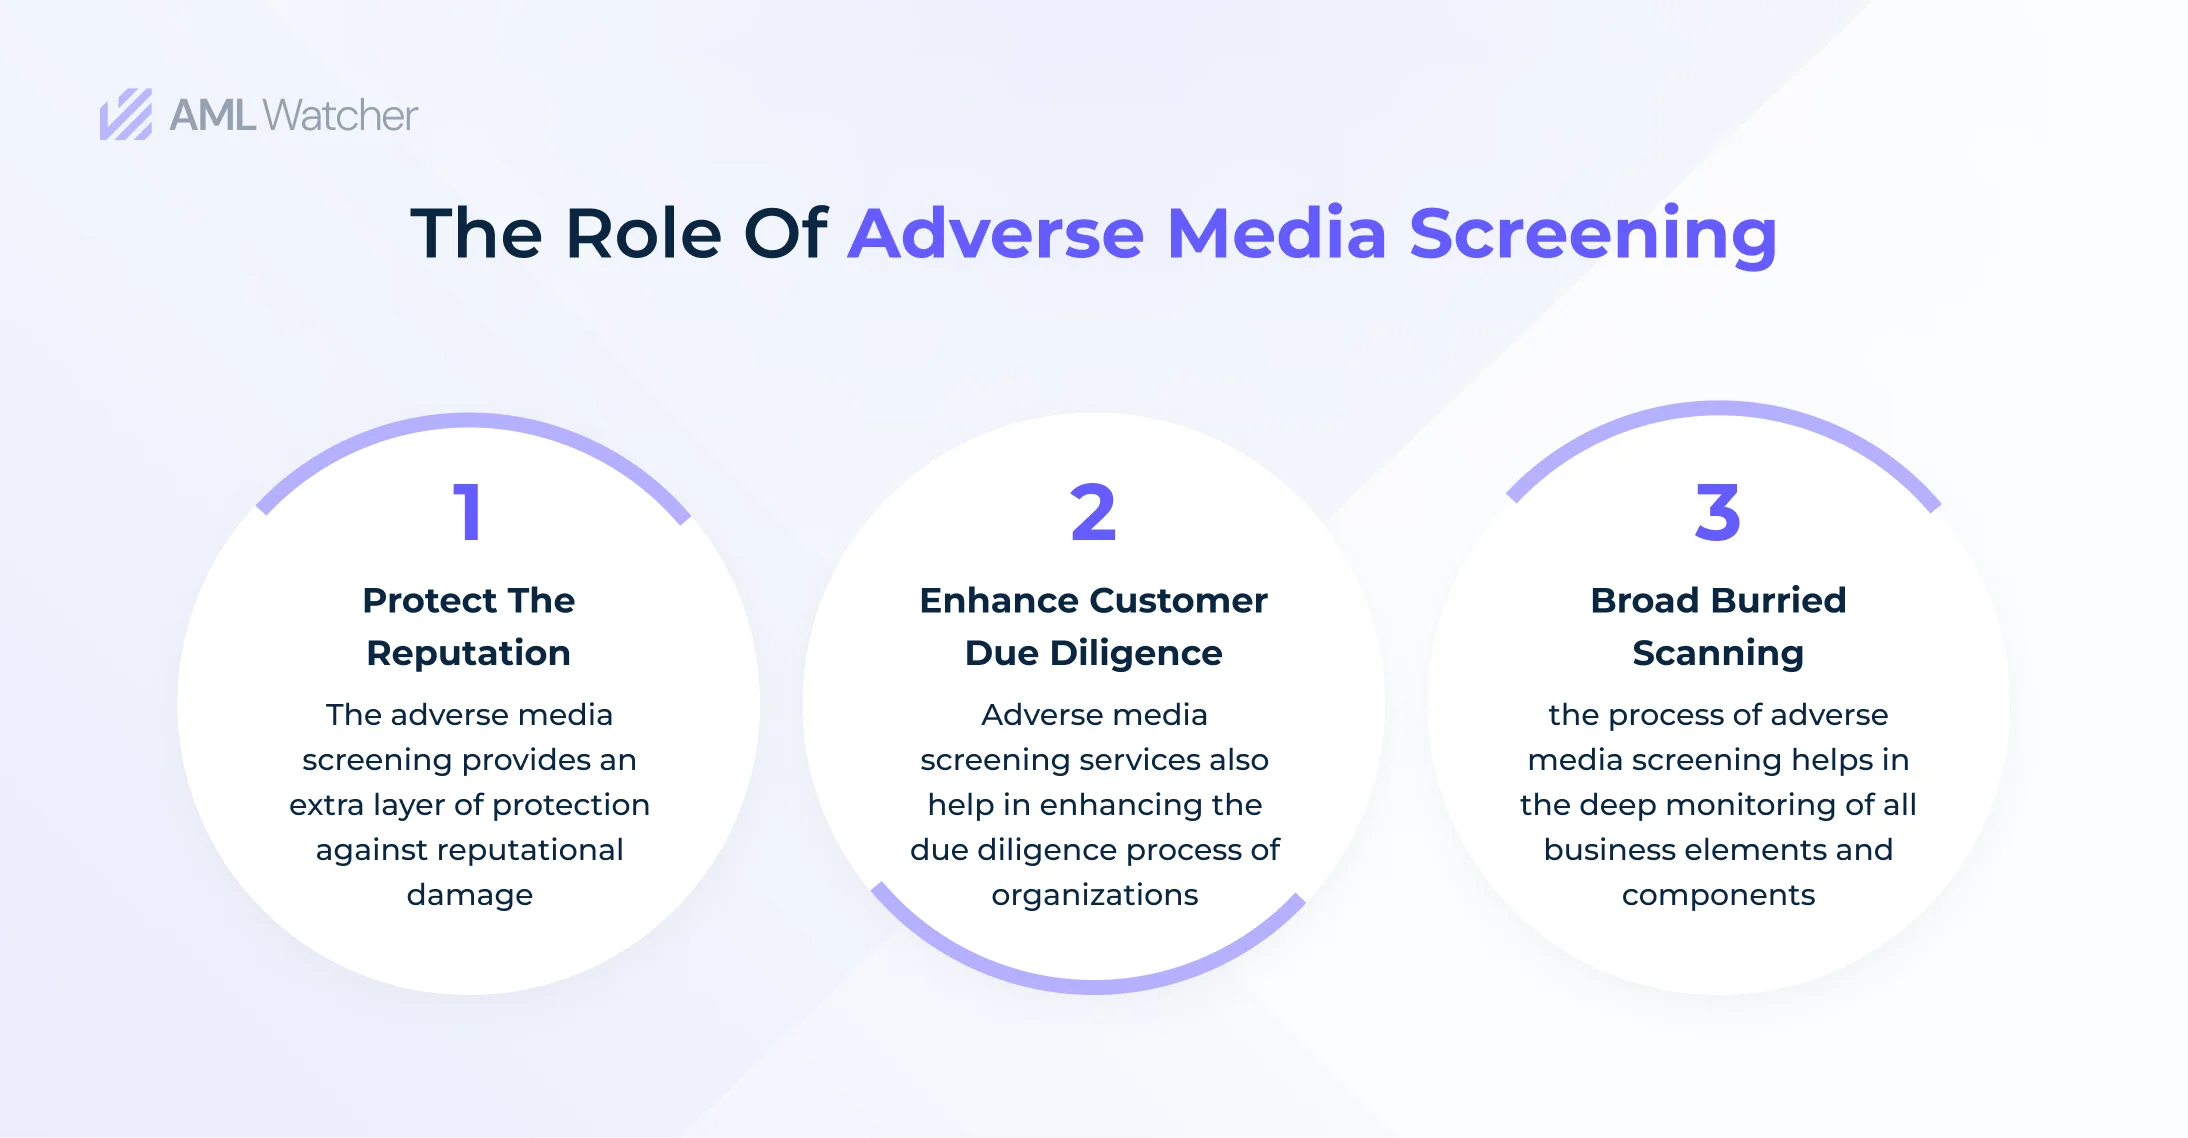 Adverse media screening plays a significant role in protecting the organization.